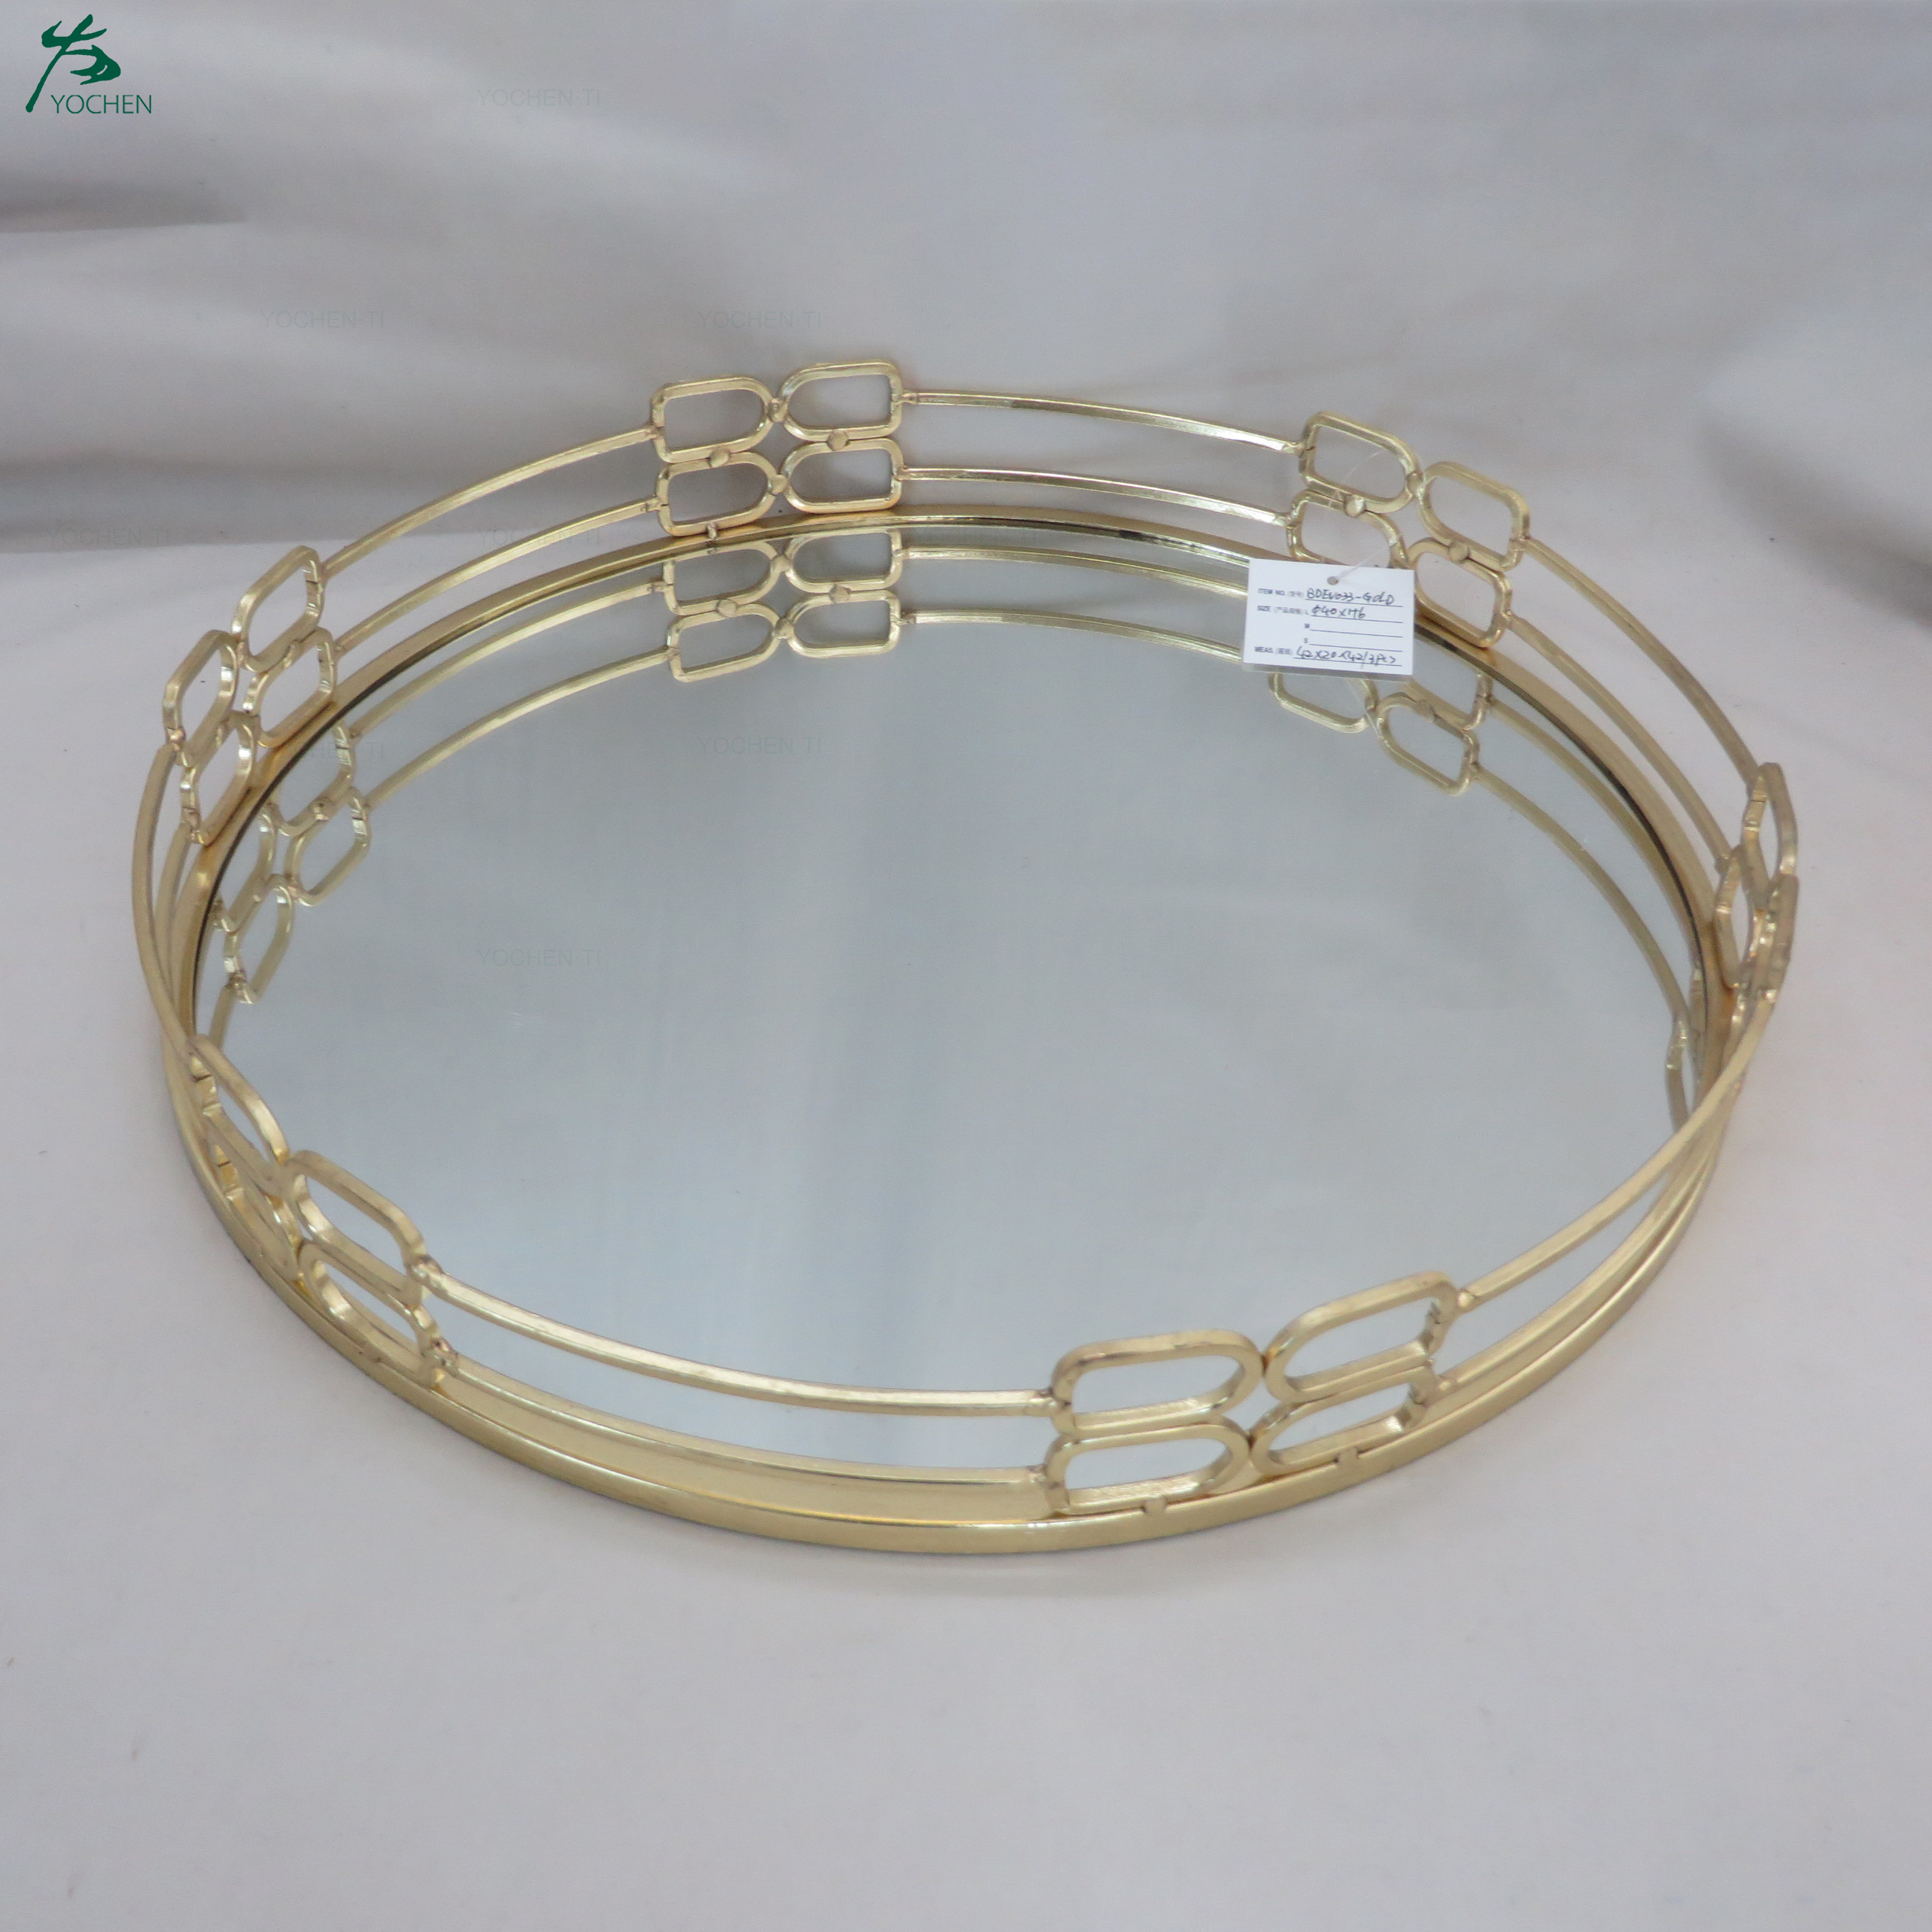 Wholesale Gold Metal Glass Mirror Serving Tray Mirrored Rectangle Vanity Tray